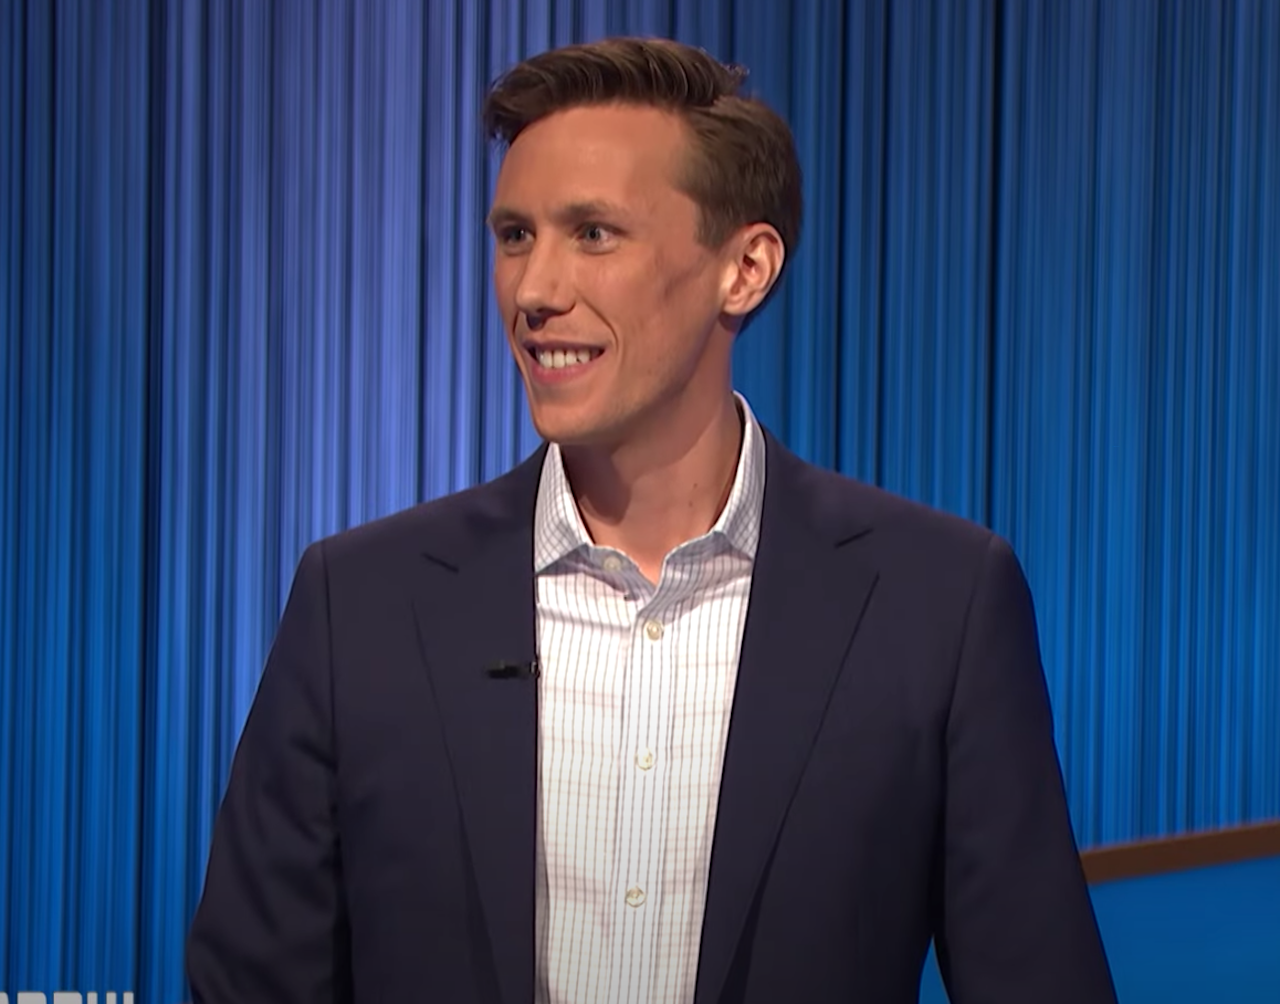 What ‘Jeopardy!’ Champ Eric Ahasic Said About Competing Against Fan Favorite Ryan Long